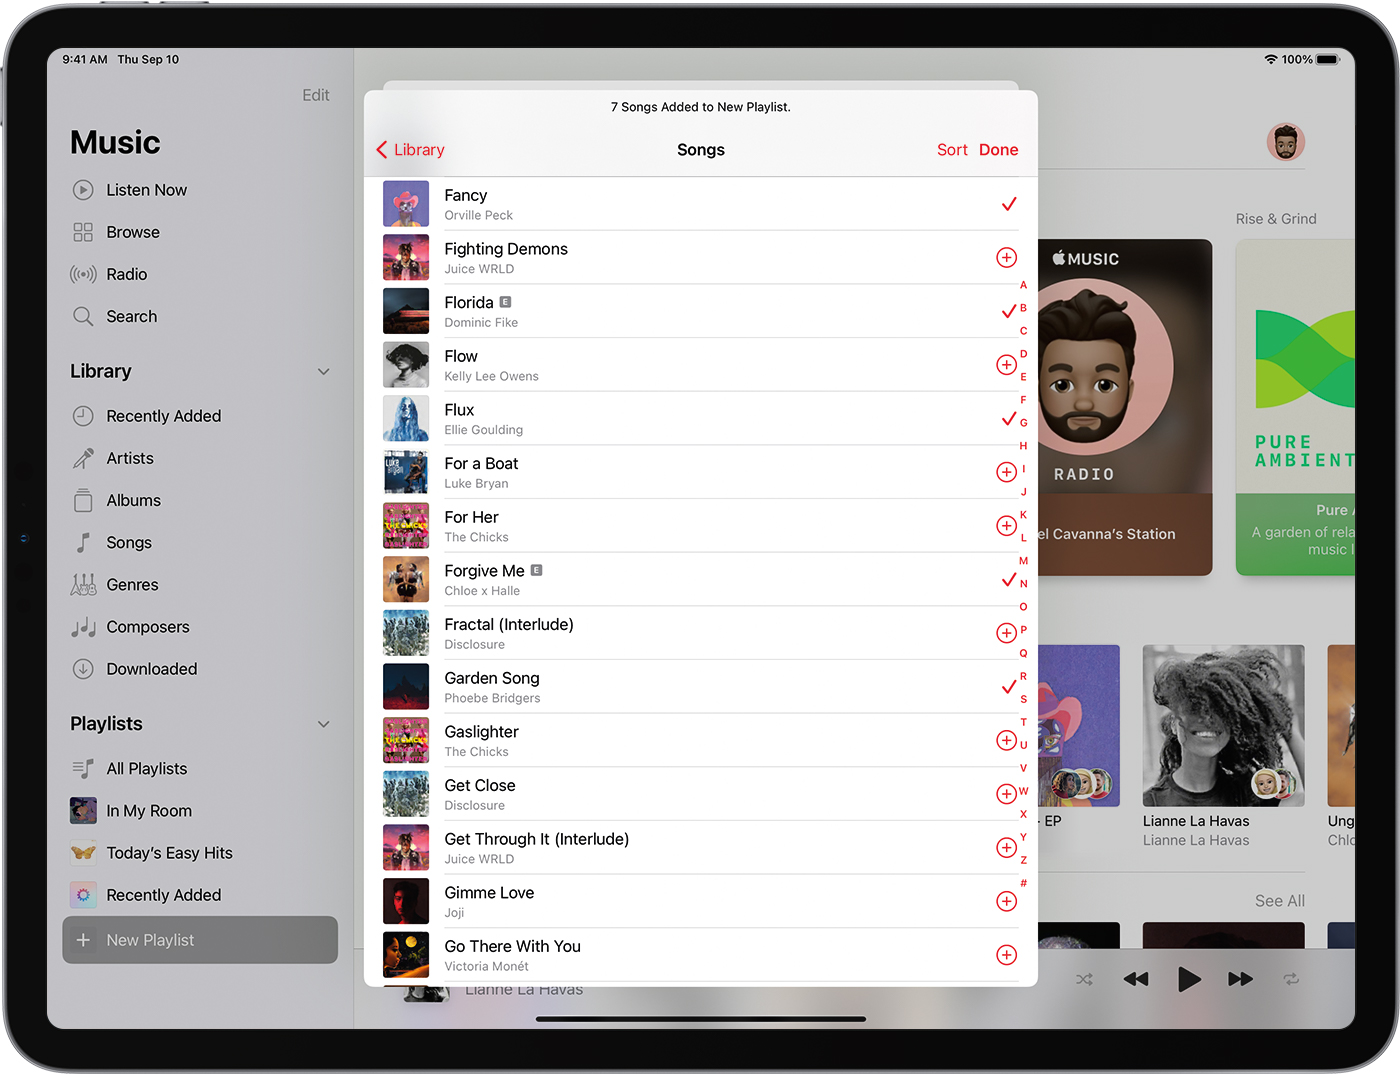 The iPad is showing 7 songs added to a new playlist